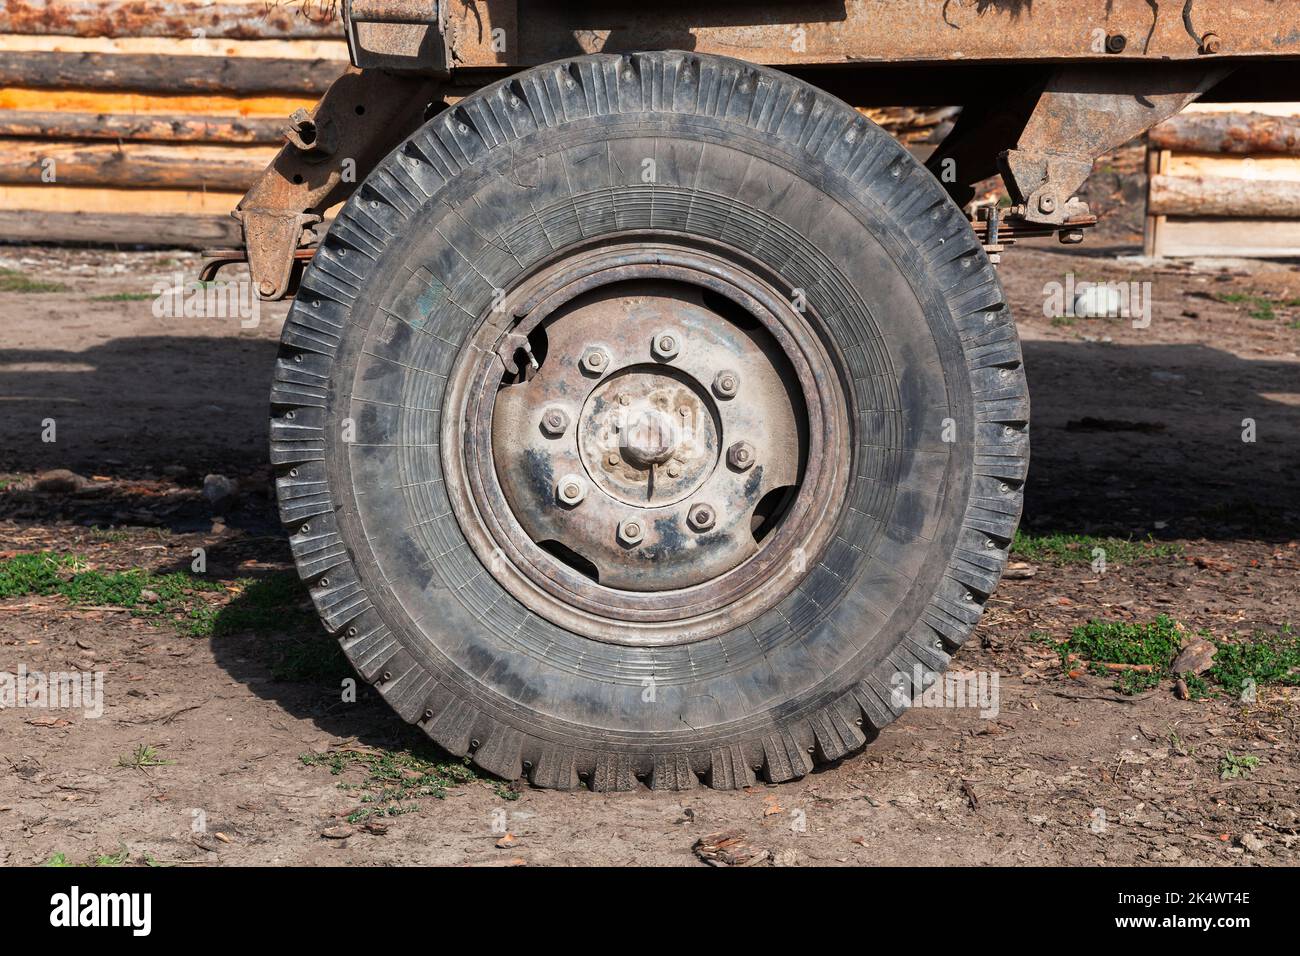 Old rusty truck wheel close up photo, front view Stock Photo